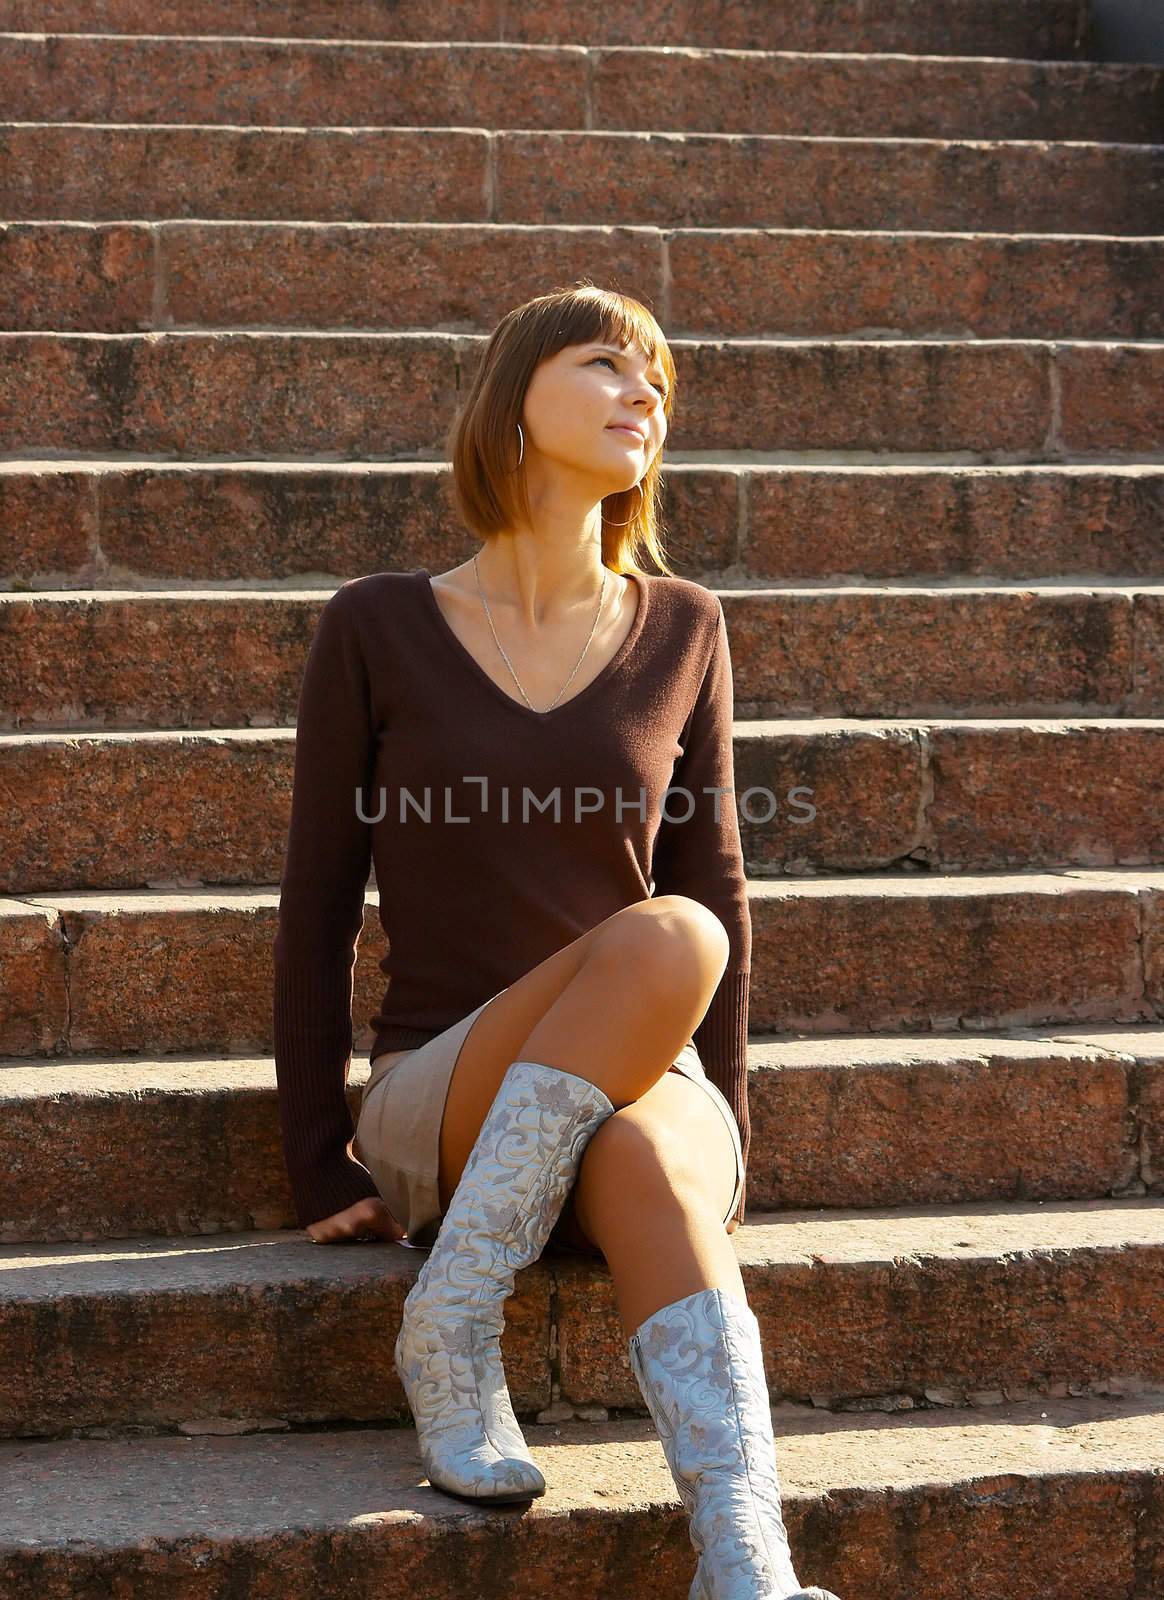 The romantic girl dreams and smiles, sitting at ladder steps. Outdoor, park